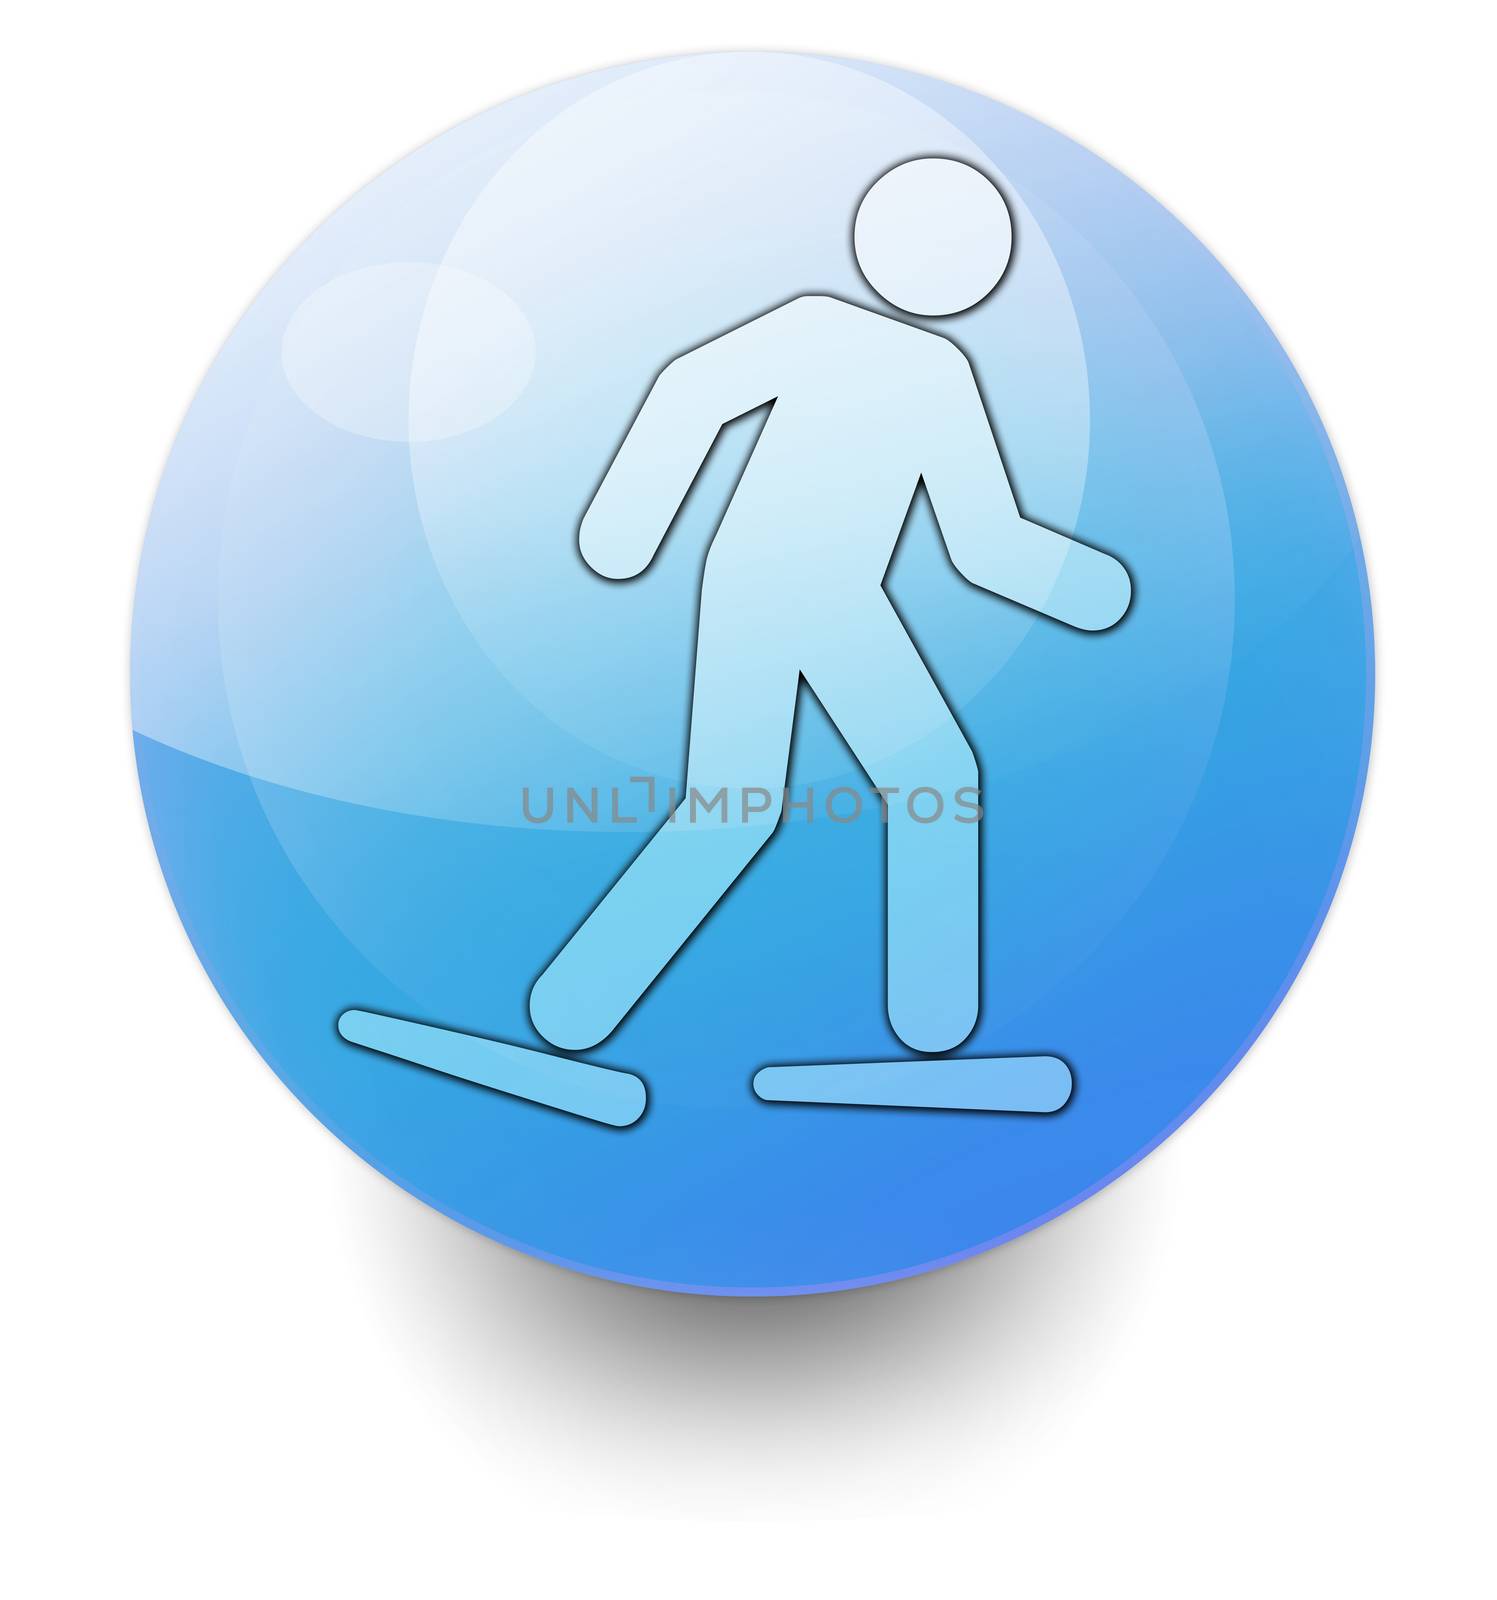 Icon, Button, Pictogram with Snowshoeing symbol